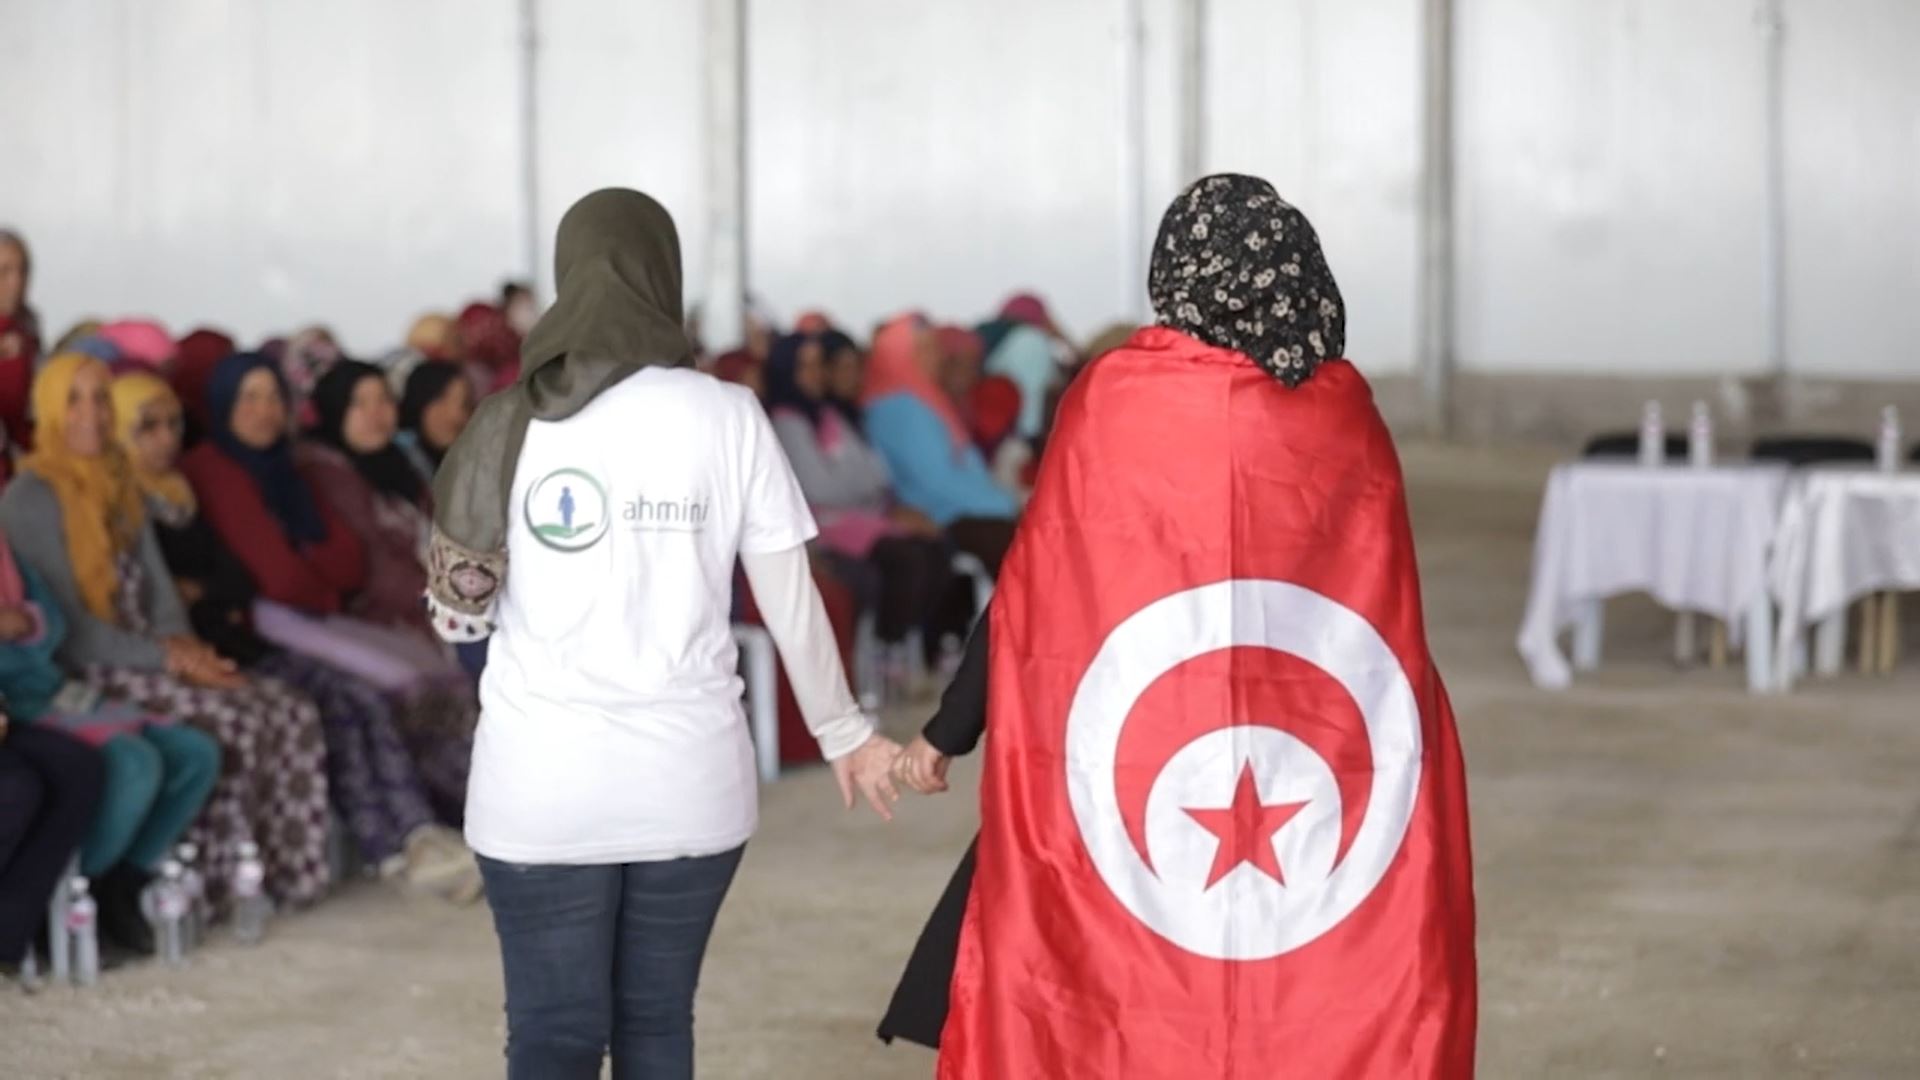 Backs of two women walking next to a seated crowd, one wearing a Tunisia flag